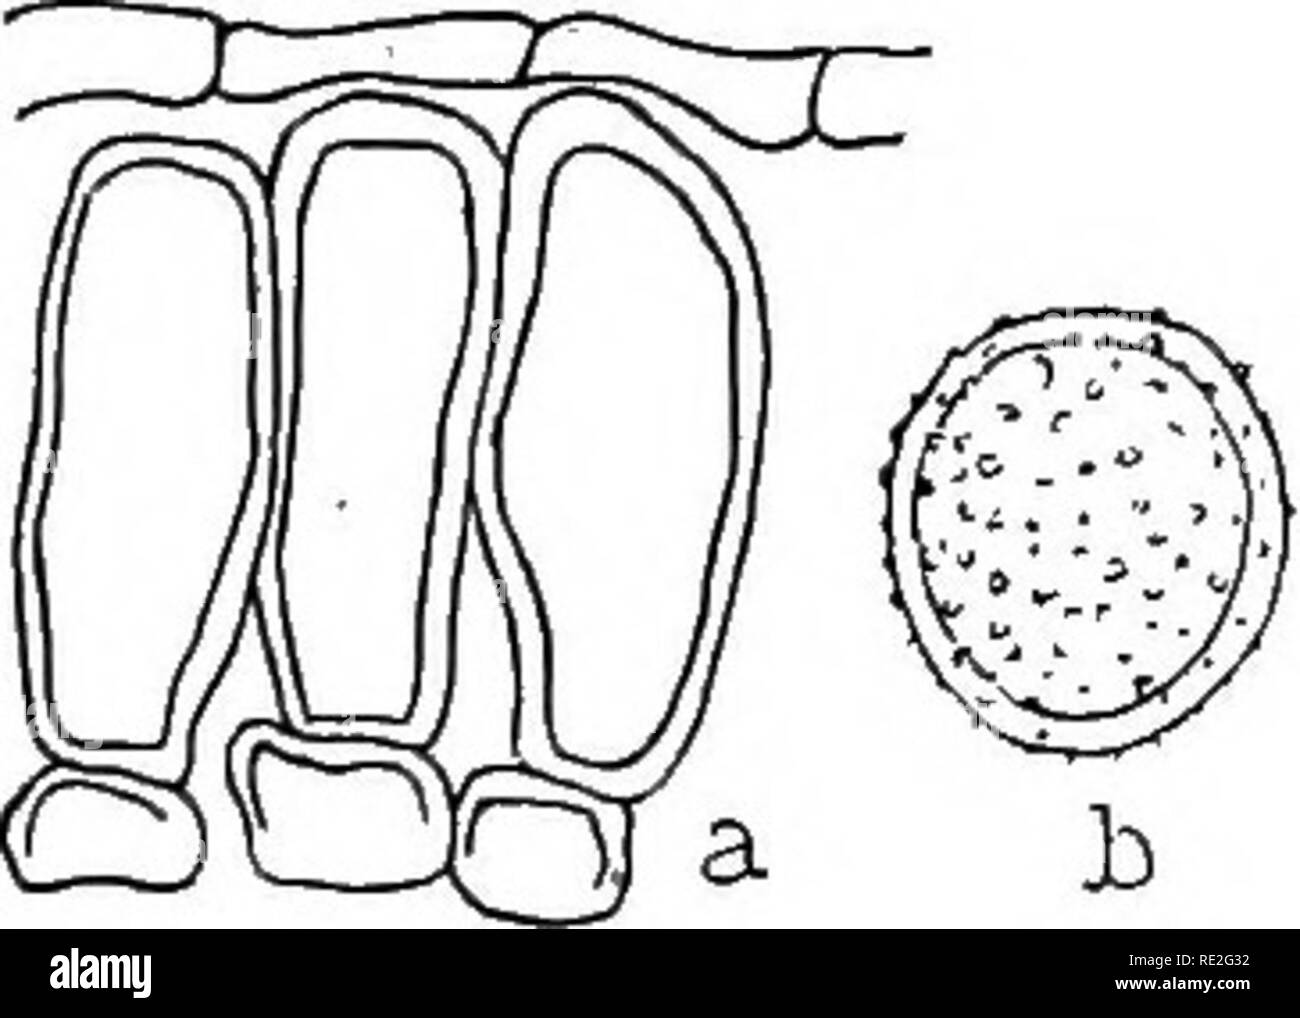 . The British rust fungi (Uredinales) their biology and classification. Rust fungi. MELAMPSORA 355 -28 X 10—18 fi;. Fig. 265. M. Hypericorum. a, teleutospores, under the epidermis; 6, soidiospore, without paraphyses. On H. Androsaemum. chains, ellipsoid to polygonal or subclavate, 18 epispore colourless, about 2 /a thick, rather densely verruculose, with no perceptible germ-pores; no para- physes. Teleutospores. Sori hypophyllous, subepidermal, small, roundish, red- dish-brown, then dark-brown; spores prismatic, more or less rounded above, pale-brown, 28—40 x 10—17/a; epi- spore thickened (up  Stock Photo